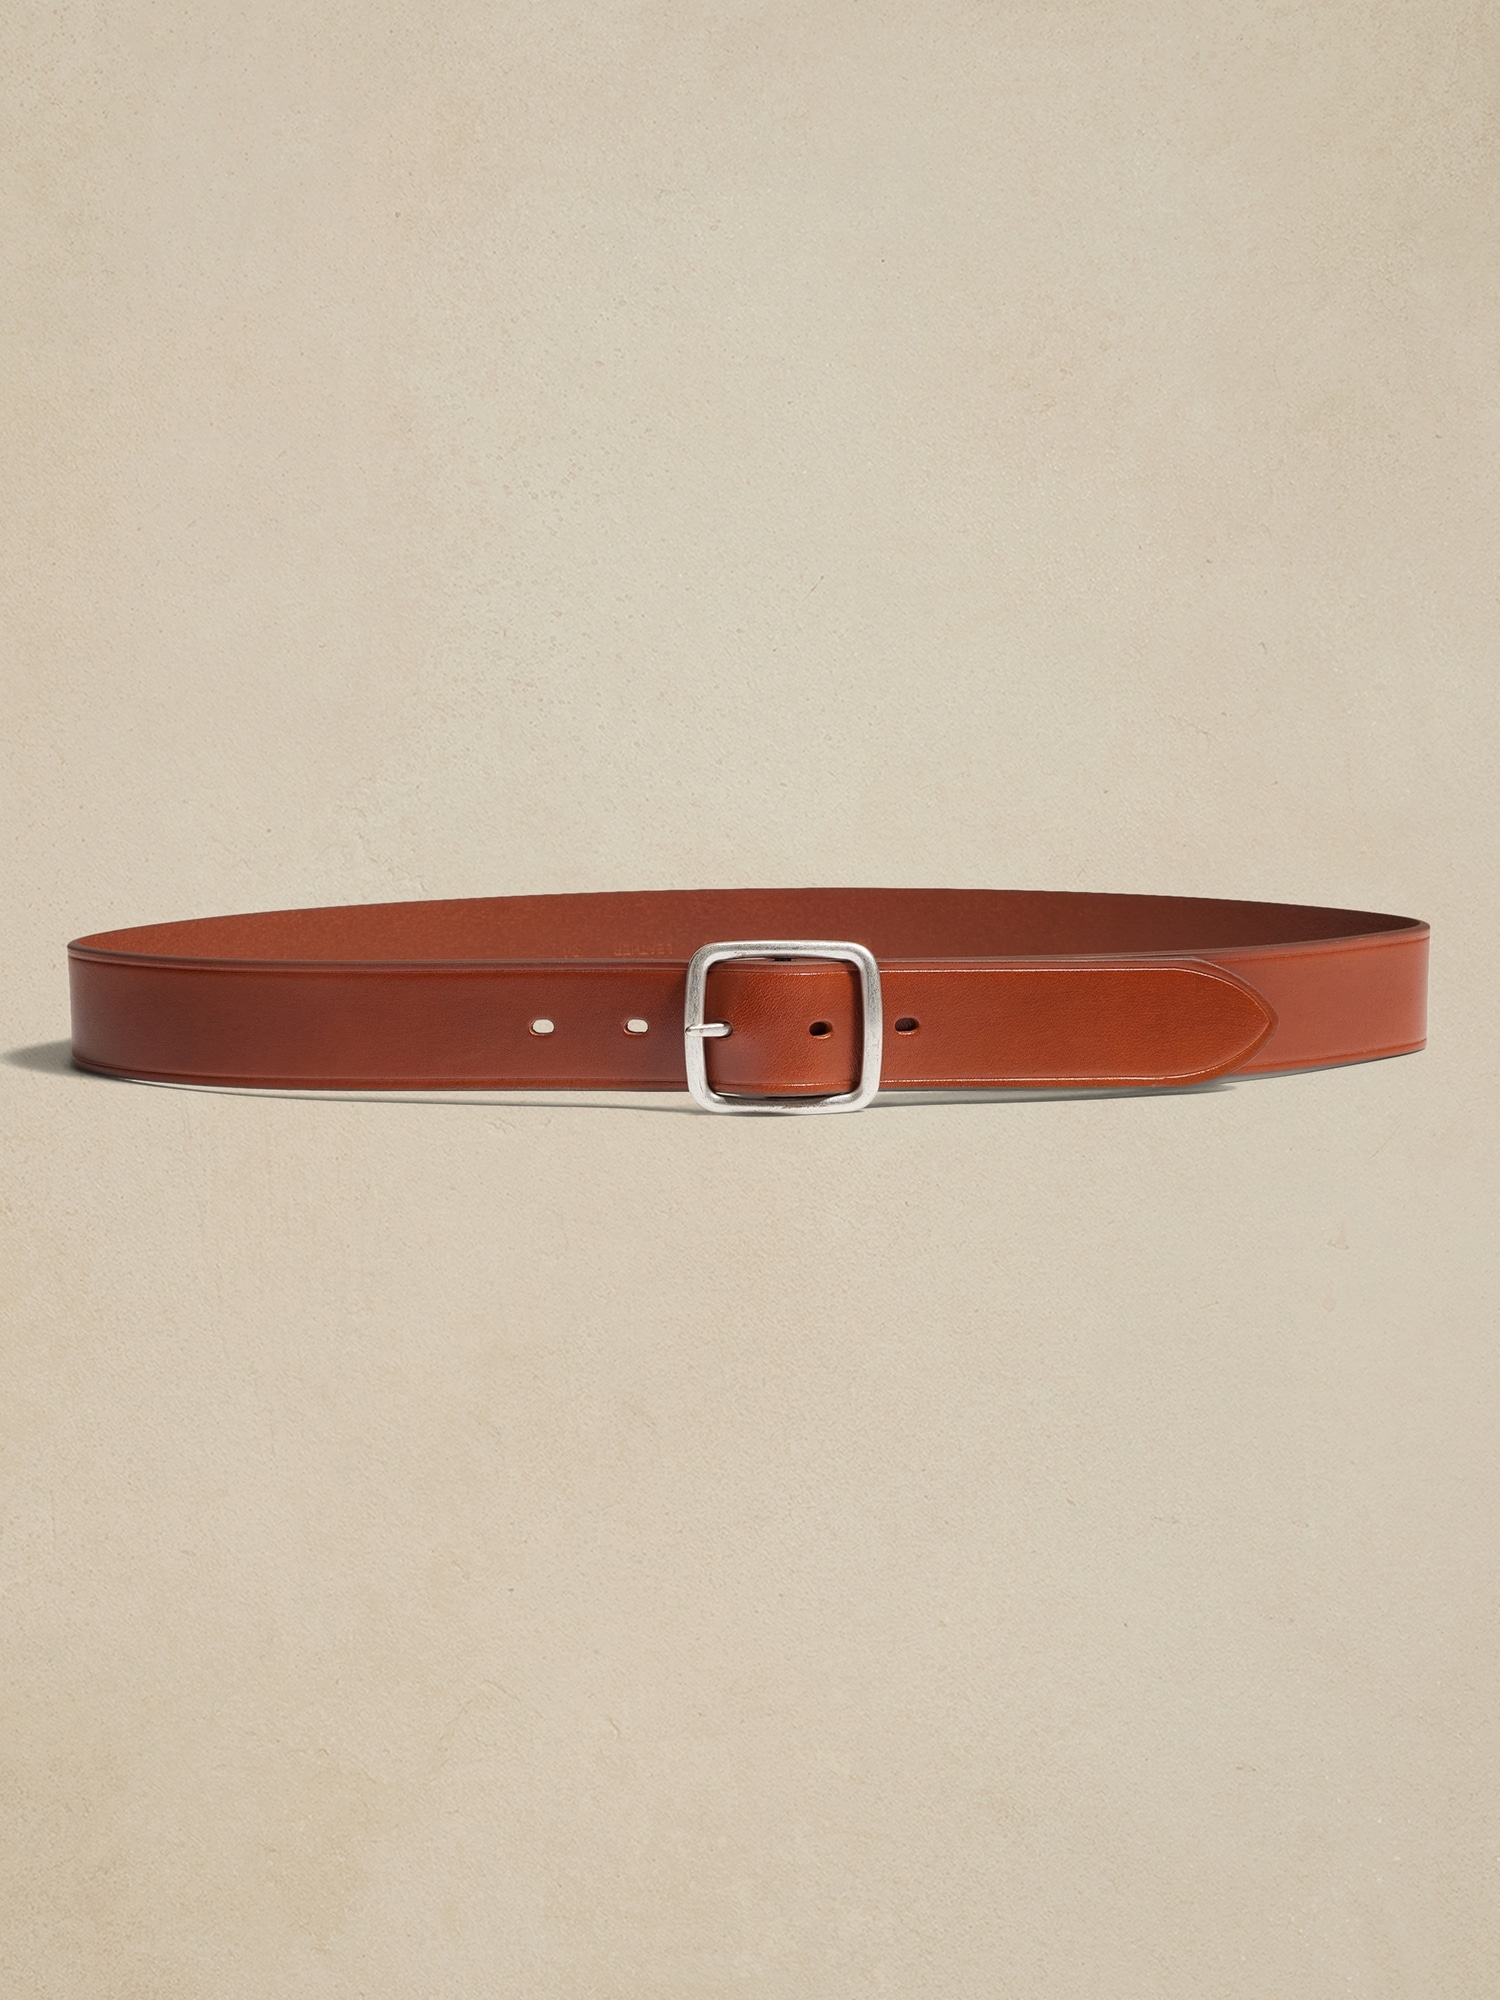 Kiench Girls Leather Belts with Heart Buckle Hollow India | Ubuy